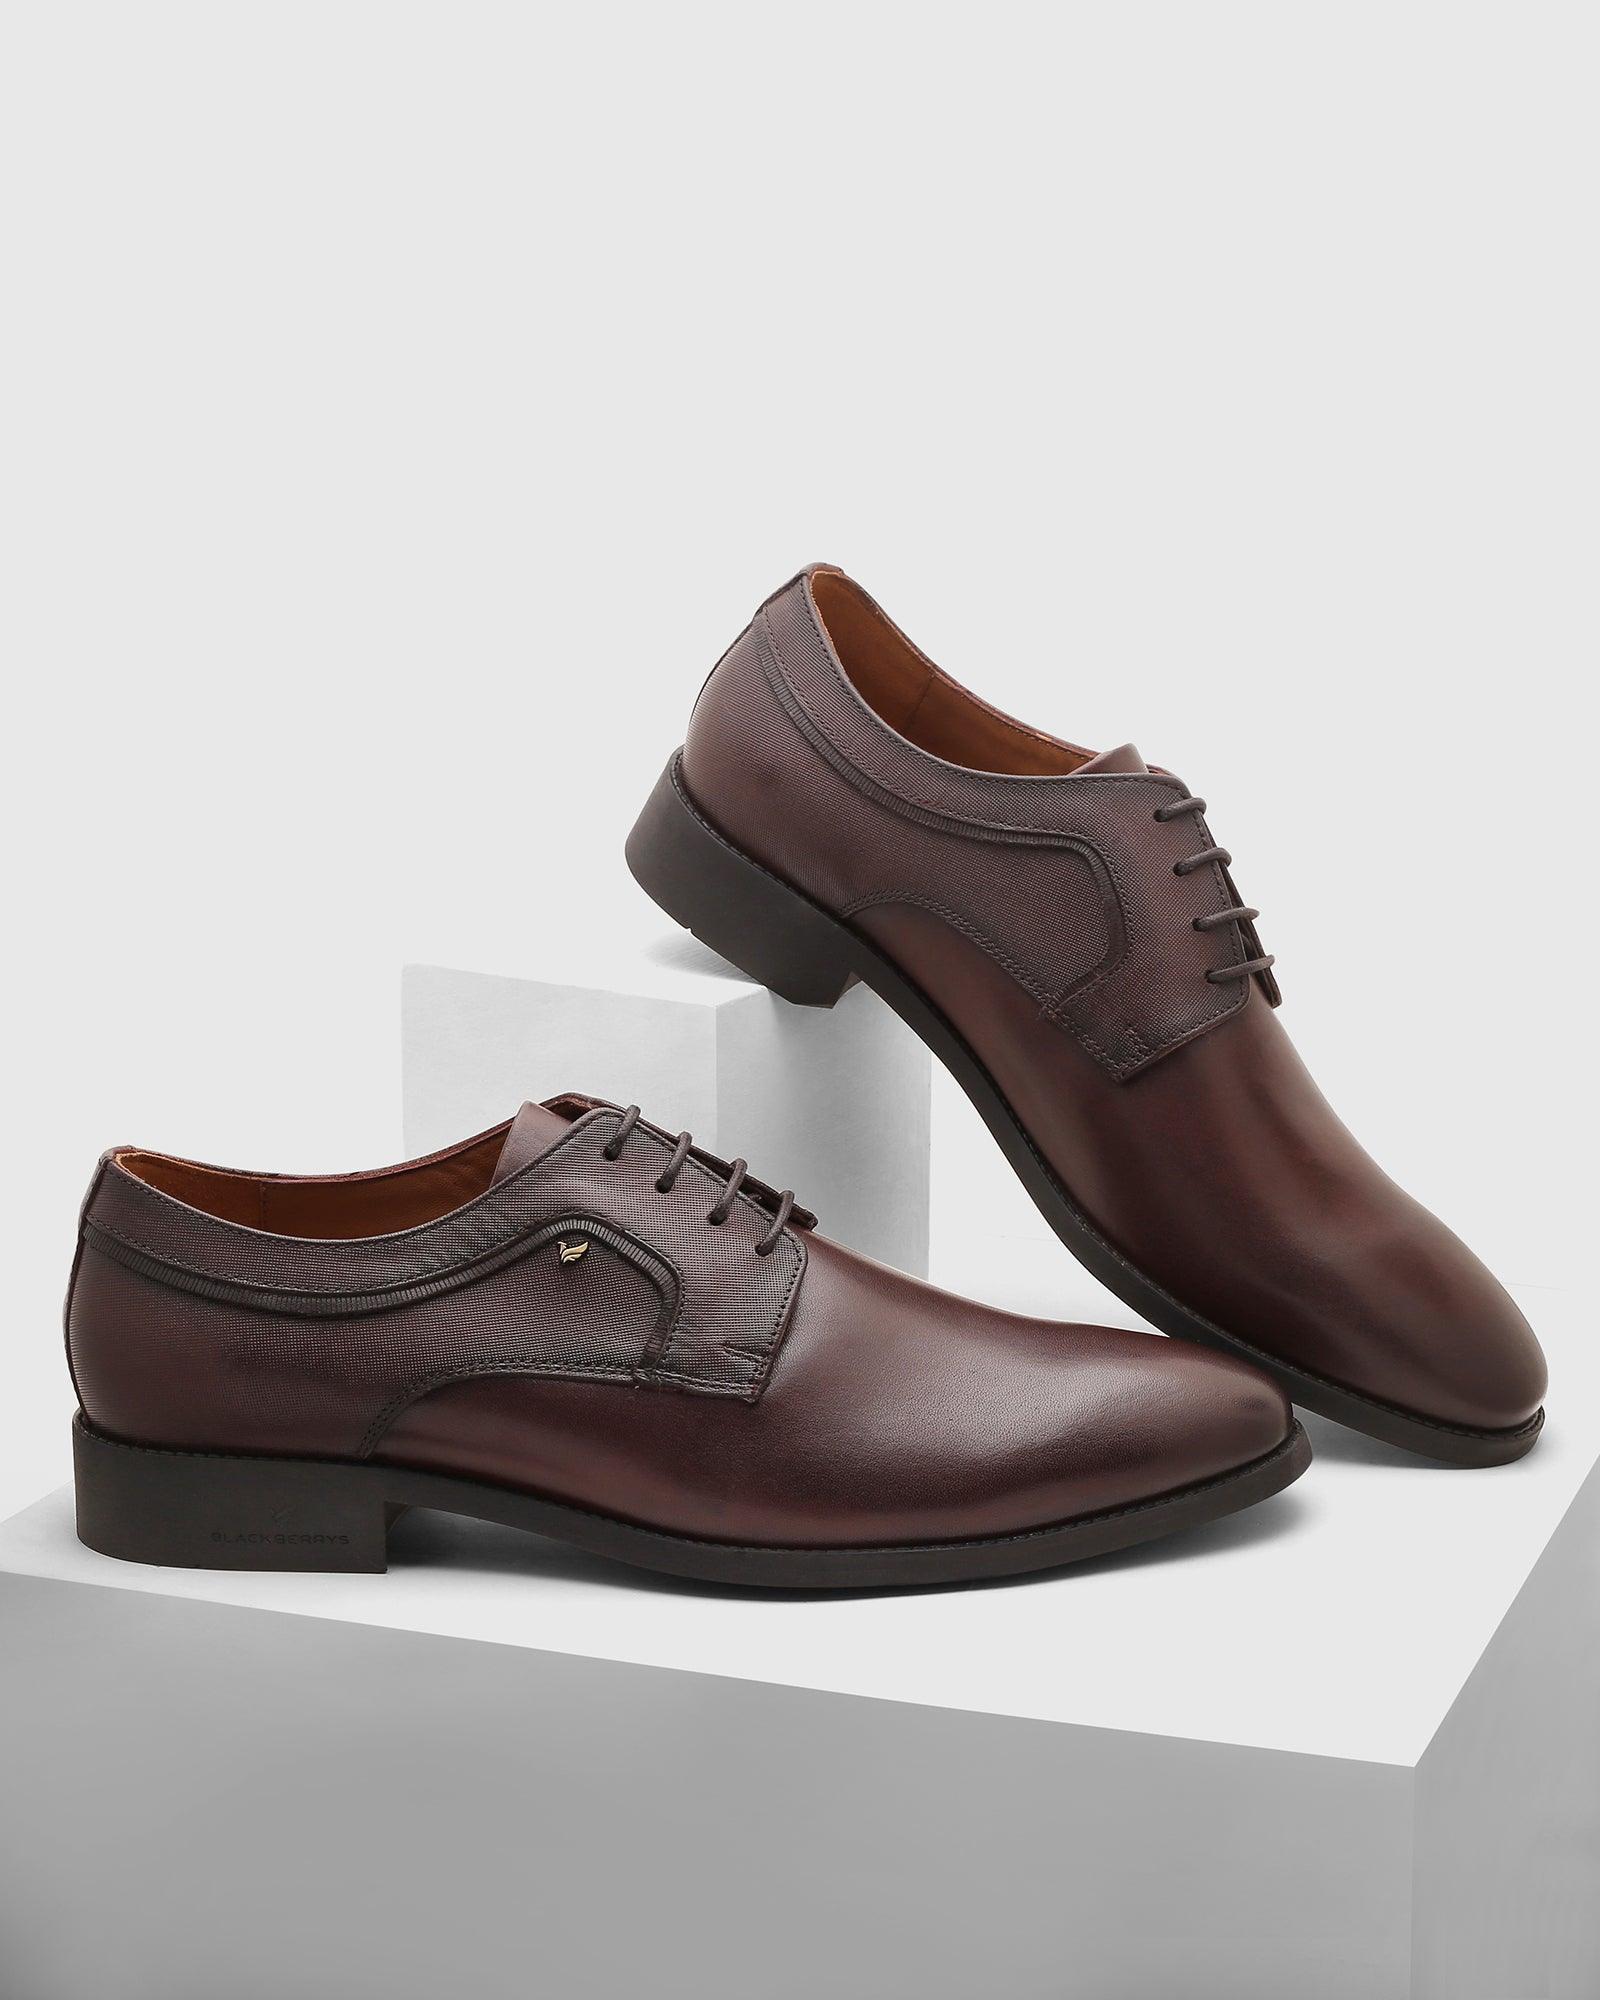 leather derby shoes in burgandy (quddor)